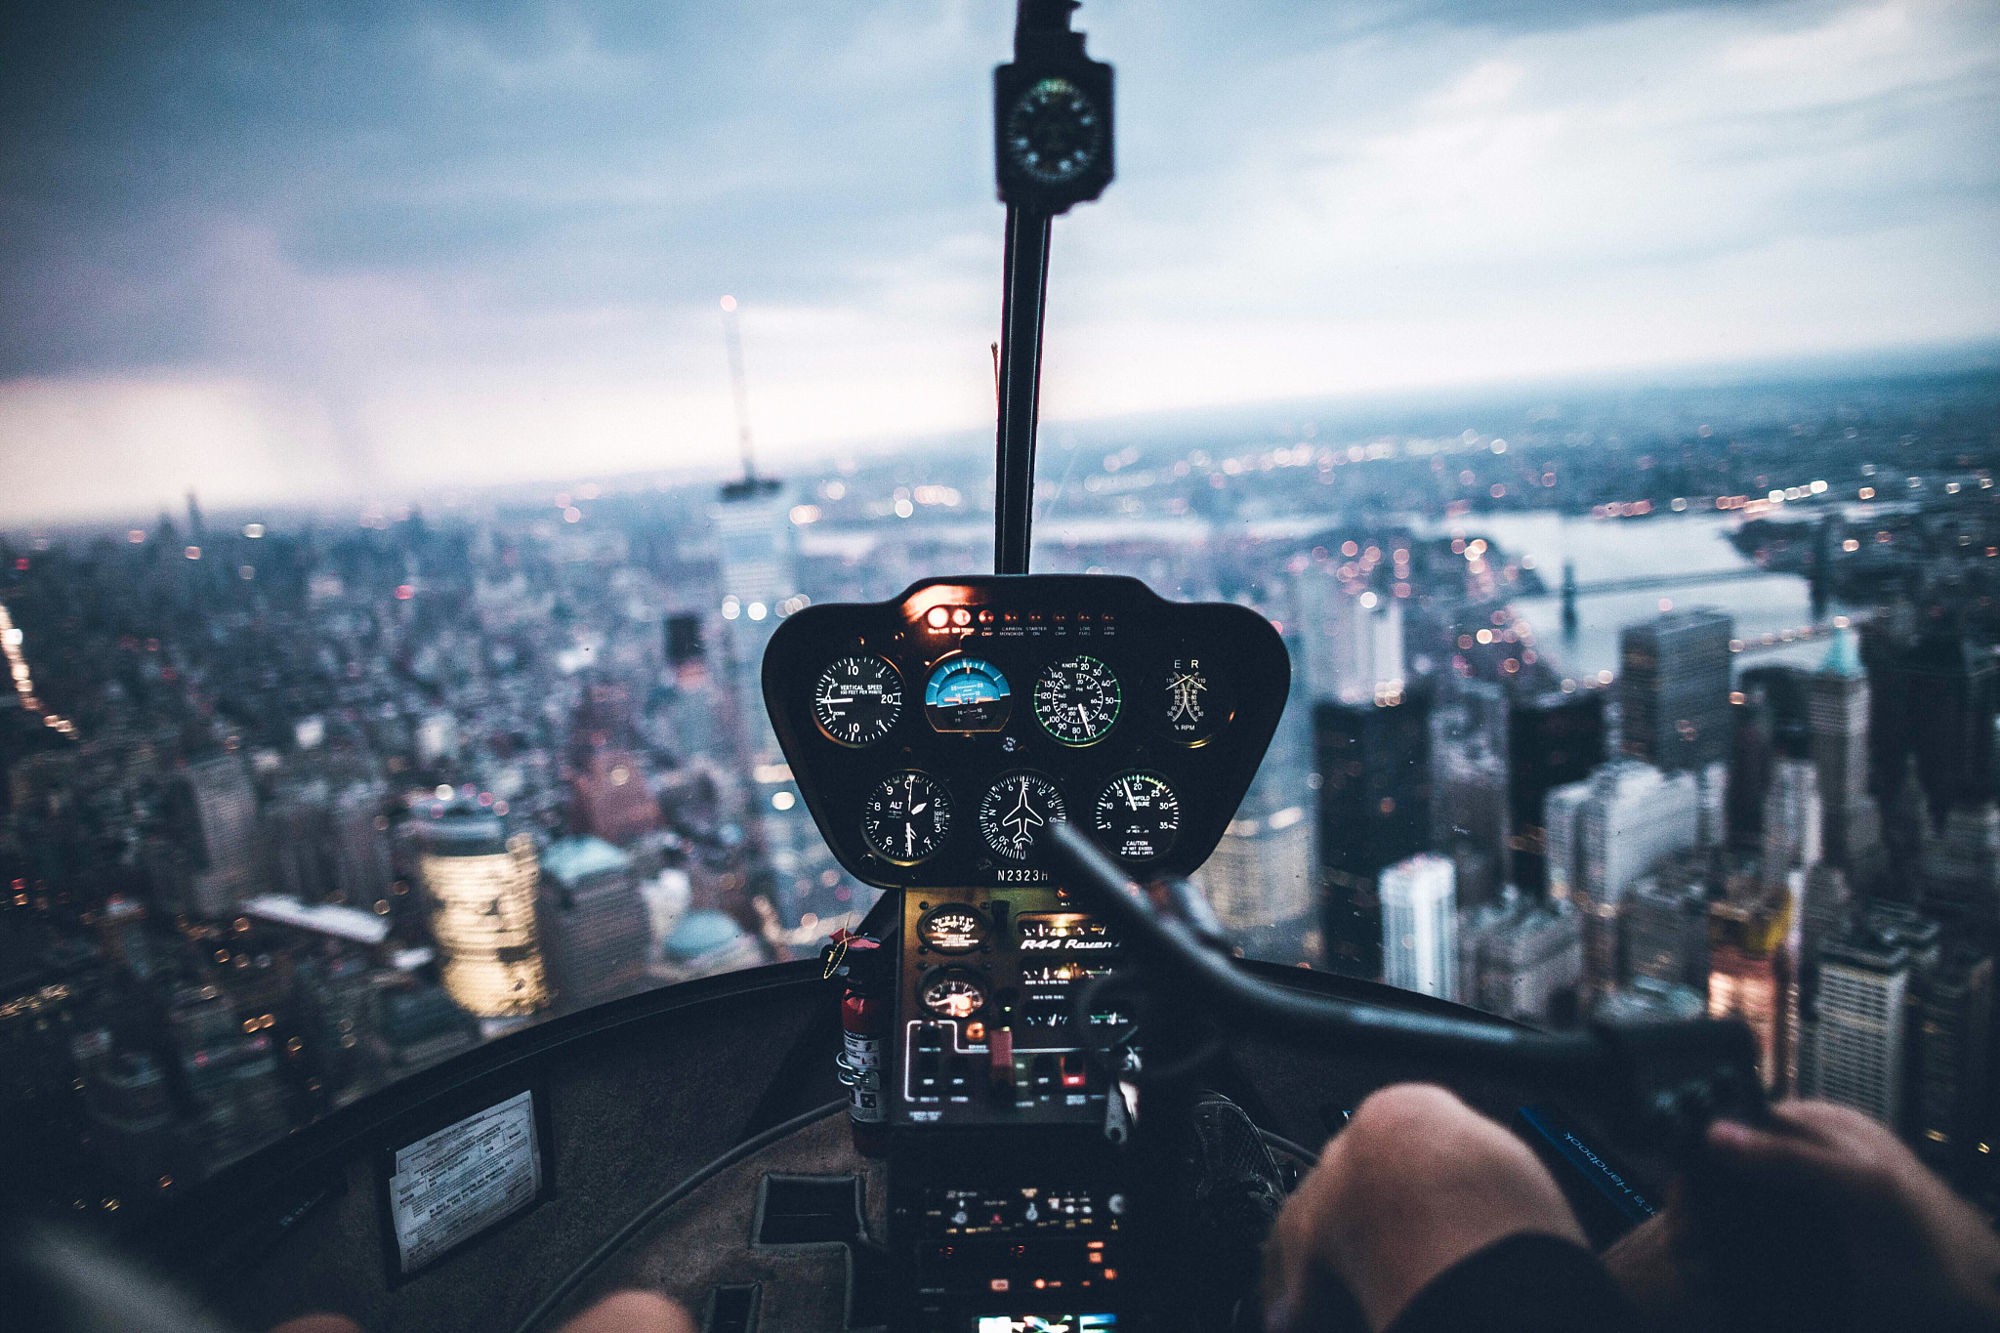 General 2000x1333 helicopters cityscape bokeh aerial view New York City vehicle cockpit USA